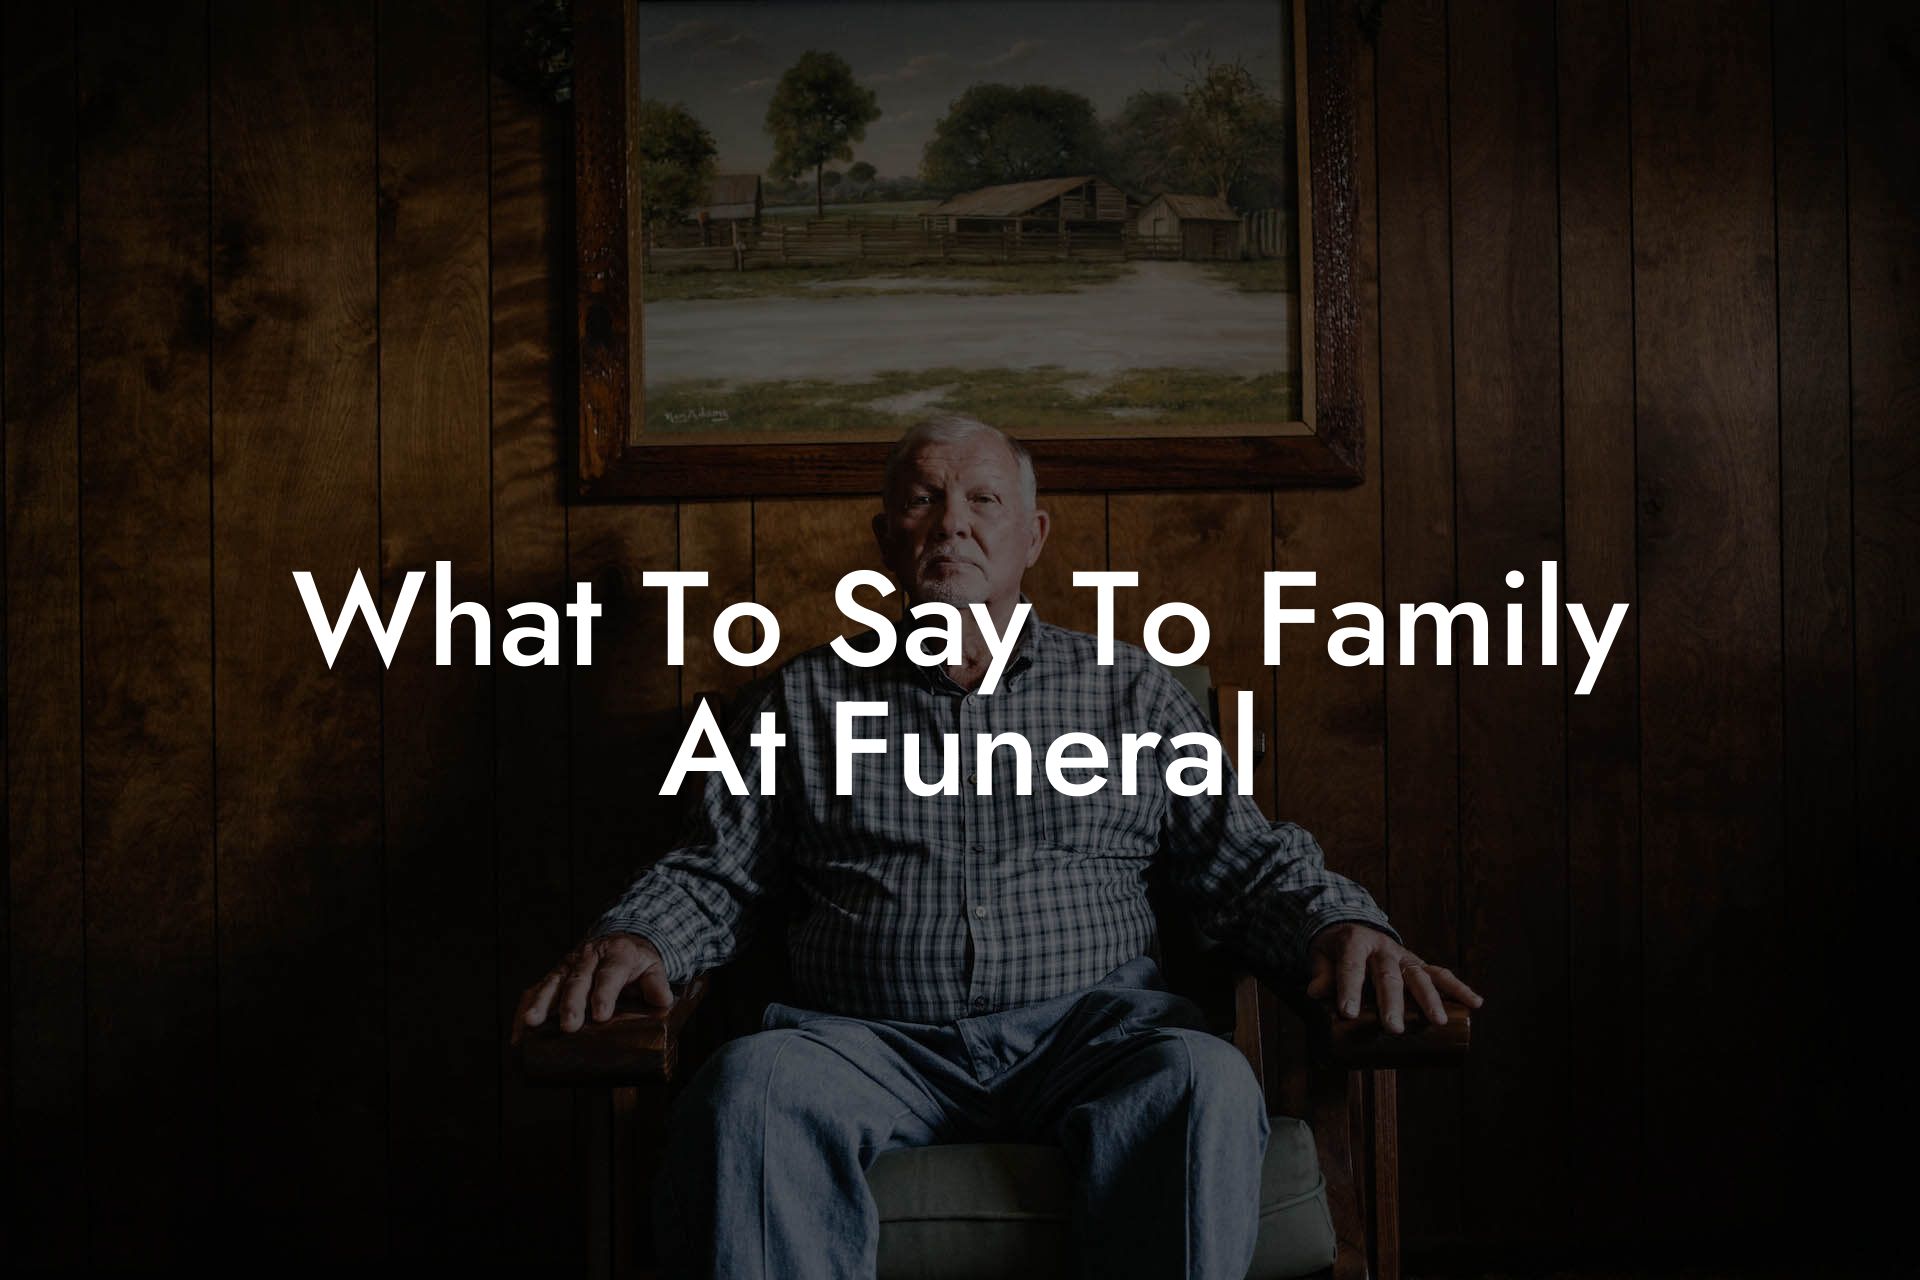 What To Say To Family At Funeral